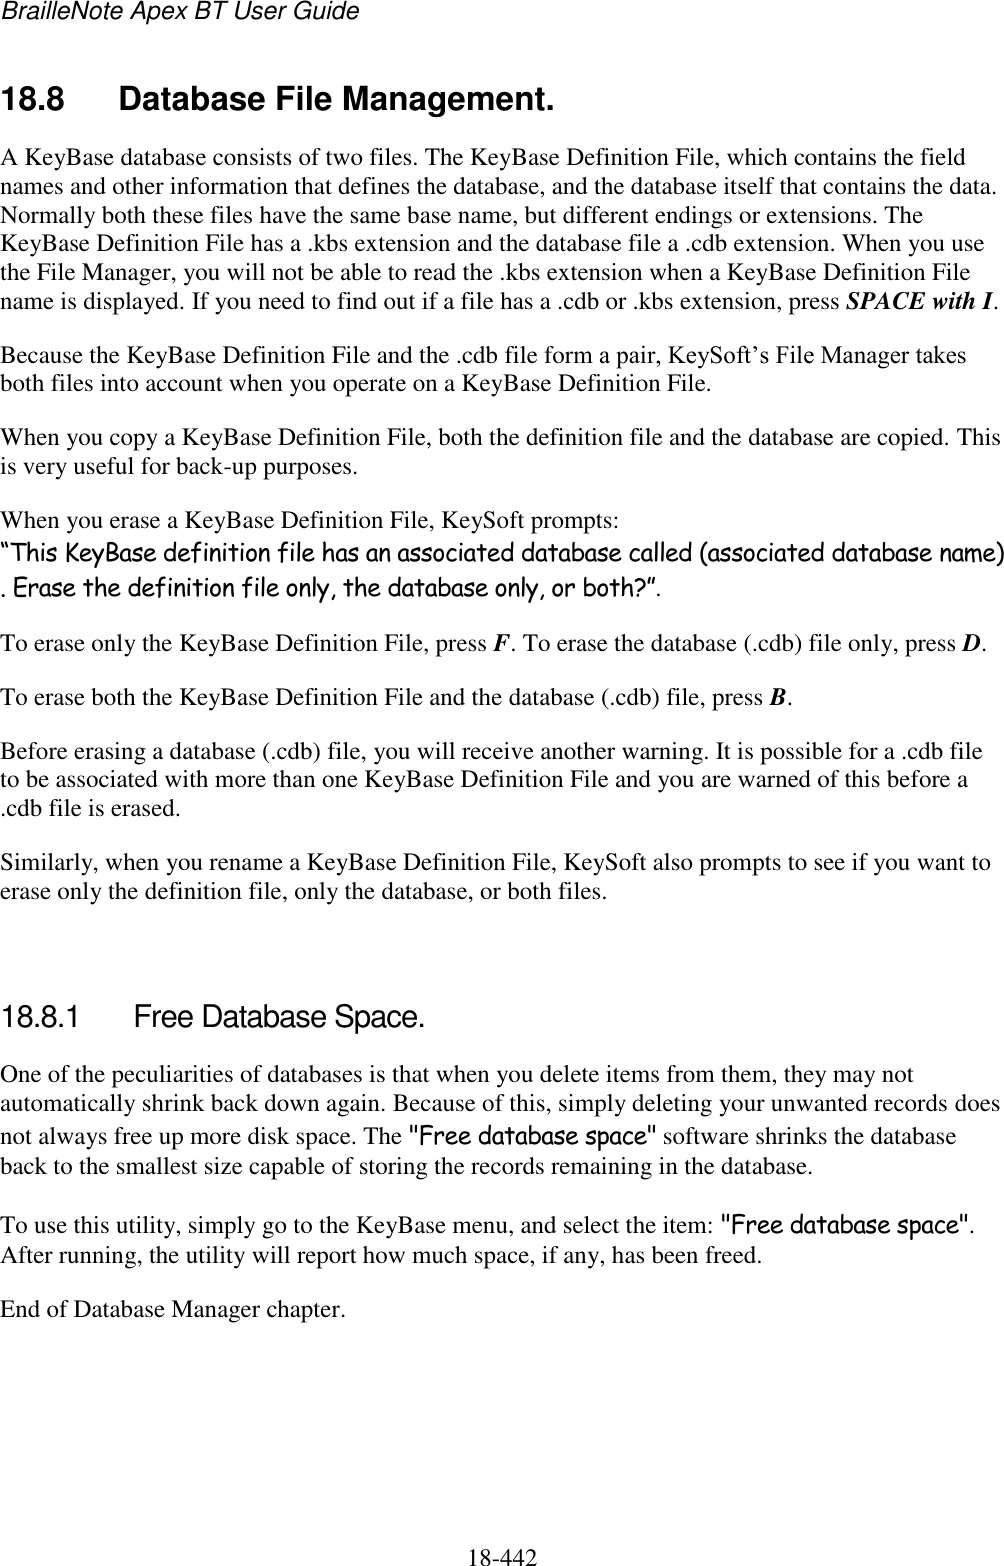 BrailleNote Apex BT User Guide   18-442   18.8  Database File Management. A KeyBase database consists of two files. The KeyBase Definition File, which contains the field names and other information that defines the database, and the database itself that contains the data. Normally both these files have the same base name, but different endings or extensions. The KeyBase Definition File has a .kbs extension and the database file a .cdb extension. When you use the File Manager, you will not be able to read the .kbs extension when a KeyBase Definition File name is displayed. If you need to find out if a file has a .cdb or .kbs extension, press SPACE with I.  Because the KeyBase Definition File and the .cdb file form a pair, KeySoft‟s File Manager takes both files into account when you operate on a KeyBase Definition File. When you copy a KeyBase Definition File, both the definition file and the database are copied. This is very useful for back-up purposes. When you erase a KeyBase Definition File, KeySoft prompts: “This KeyBase definition file has an associated database called (associated database name). Erase the definition file only, the database only, or both?”.  To erase only the KeyBase Definition File, press F. To erase the database (.cdb) file only, press D.  To erase both the KeyBase Definition File and the database (.cdb) file, press B.  Before erasing a database (.cdb) file, you will receive another warning. It is possible for a .cdb file to be associated with more than one KeyBase Definition File and you are warned of this before a .cdb file is erased. Similarly, when you rename a KeyBase Definition File, KeySoft also prompts to see if you want to erase only the definition file, only the database, or both files.   18.8.1  Free Database Space. One of the peculiarities of databases is that when you delete items from them, they may not automatically shrink back down again. Because of this, simply deleting your unwanted records does not always free up more disk space. The &quot;Free database space&quot; software shrinks the database back to the smallest size capable of storing the records remaining in the database. To use this utility, simply go to the KeyBase menu, and select the item: &quot;Free database space&quot;. After running, the utility will report how much space, if any, has been freed. End of Database Manager chapter.  